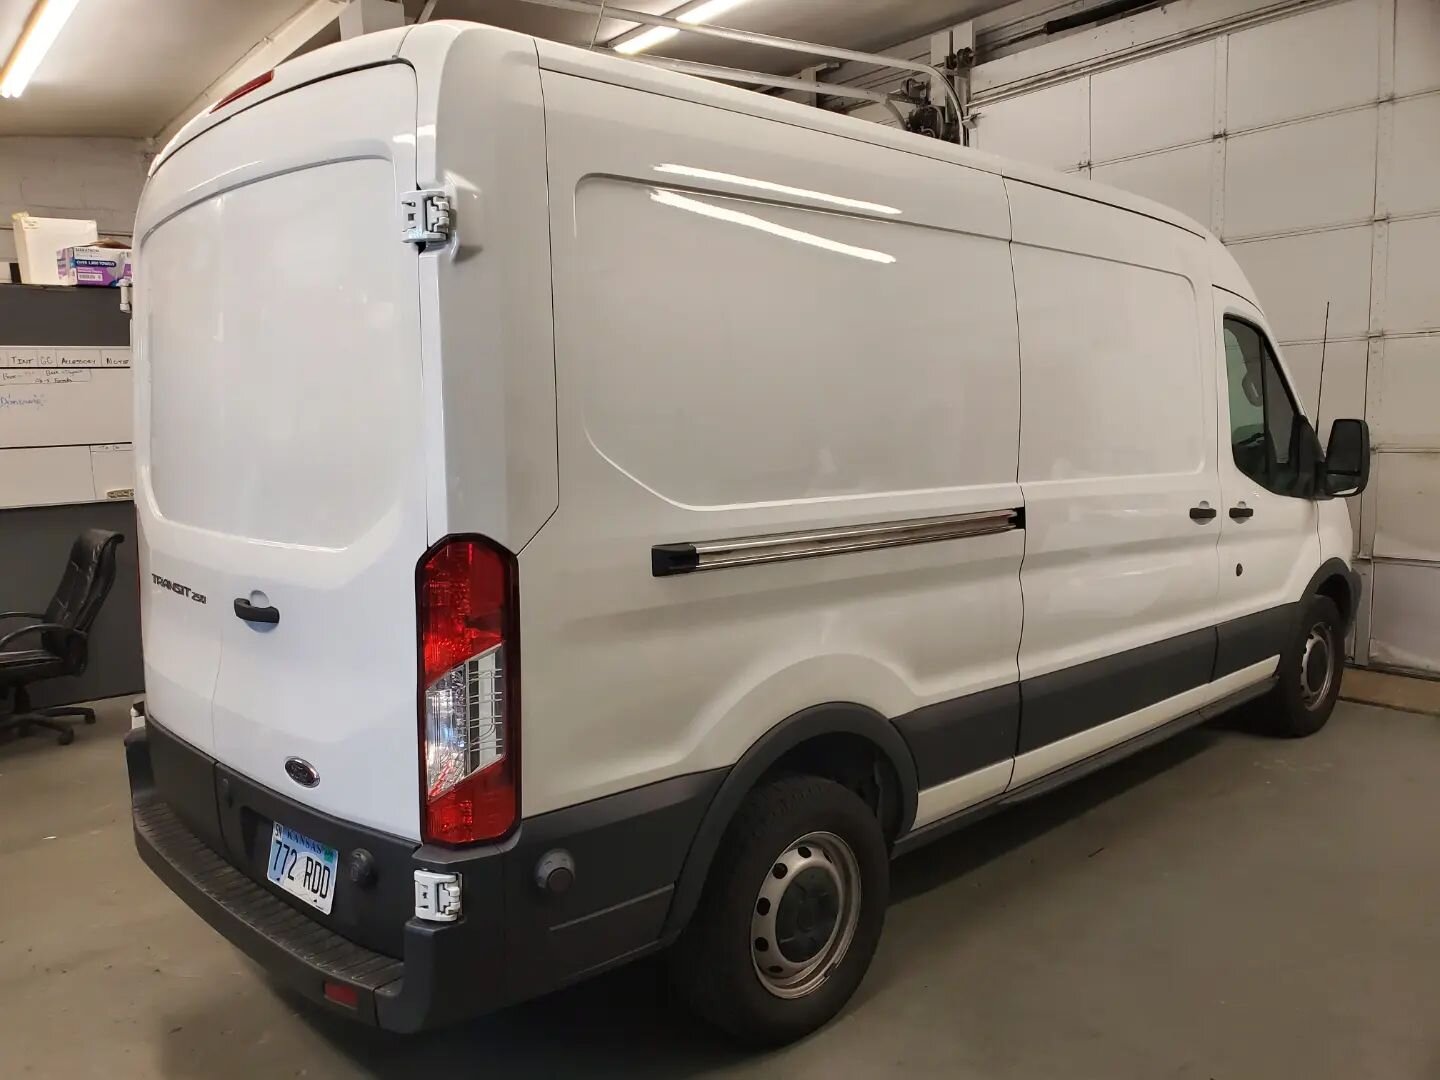 At Topeka LINE-X we offer a variety of fleet solutions and services, including fleet vehicle up-fit.

2017 Ford Transit 250
👉 @americanvan

GEAR for where you're GOING!

Topeka LINE-X &amp; Accessories Center 
🌎 3108 SW Topeka Blvd - Topeka, KS 666